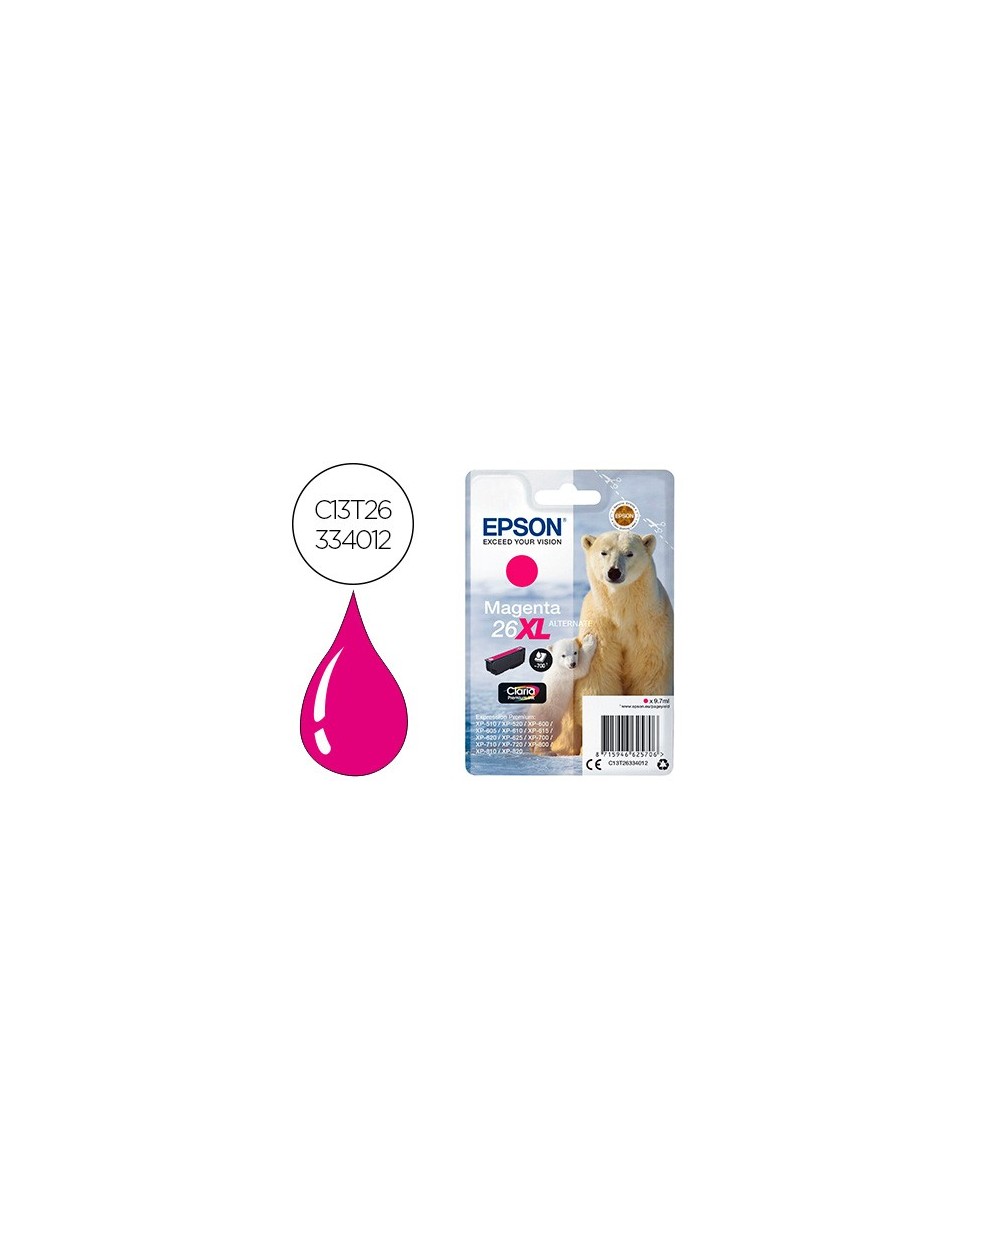 Ink jet epson 26xl xp600 605 700 800 magenta 700 pag